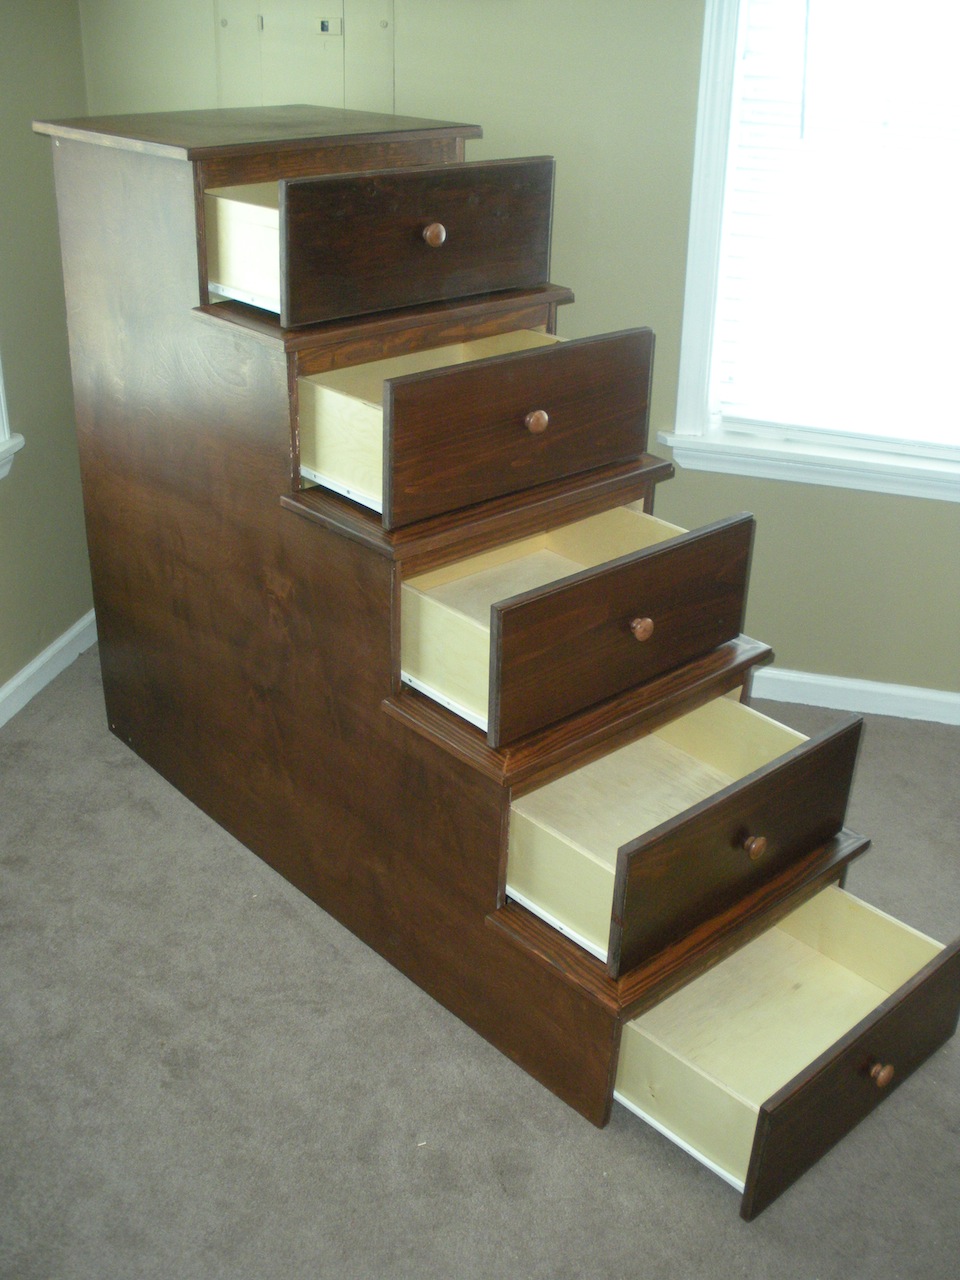 Richard S Bunk Bed Storage The Wood, Stairs For Bunk Beds How To Build